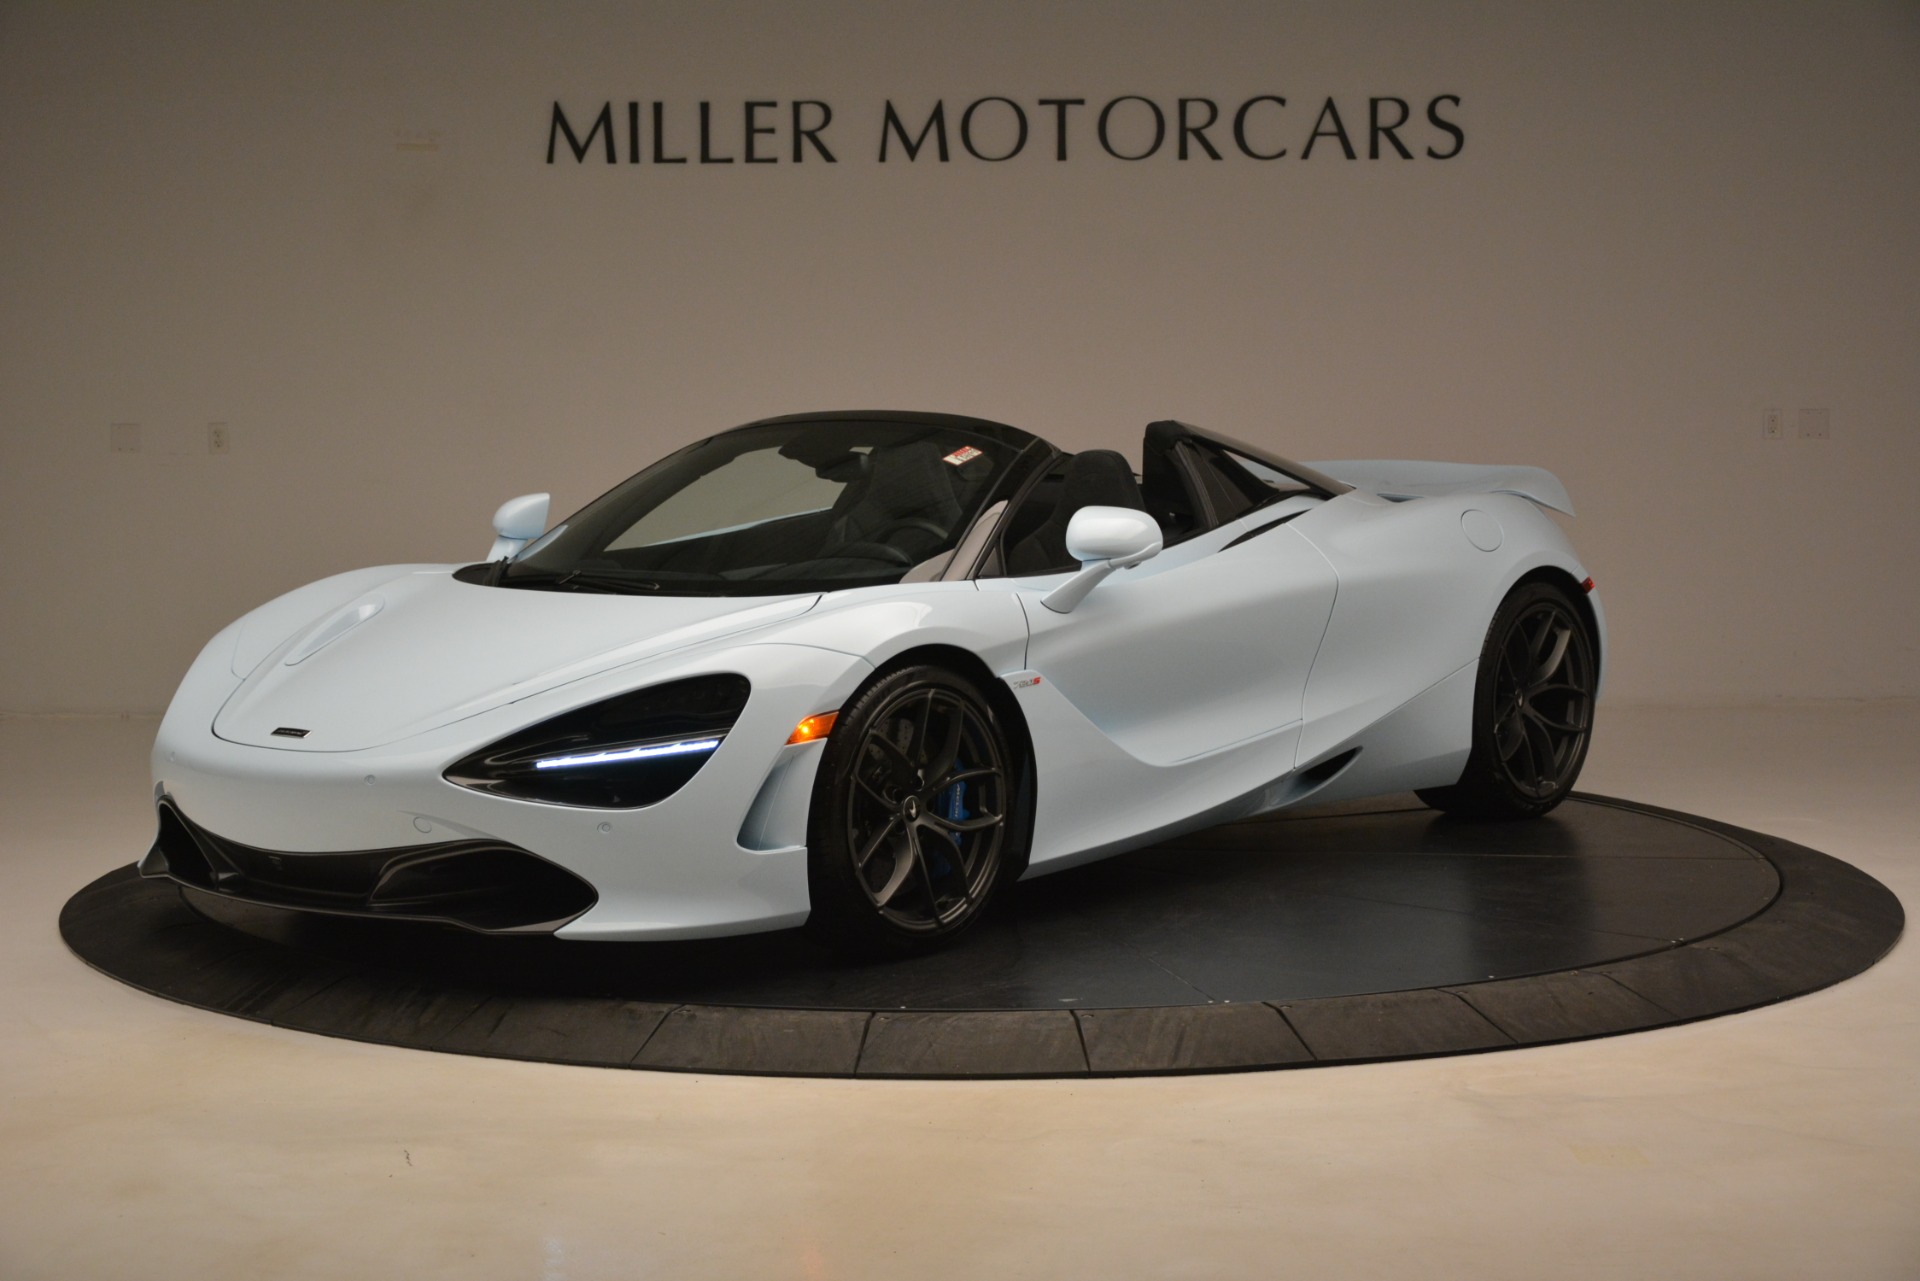 New 2020 McLaren 720S Spider for sale Sold at Pagani of Greenwich in Greenwich CT 06830 1